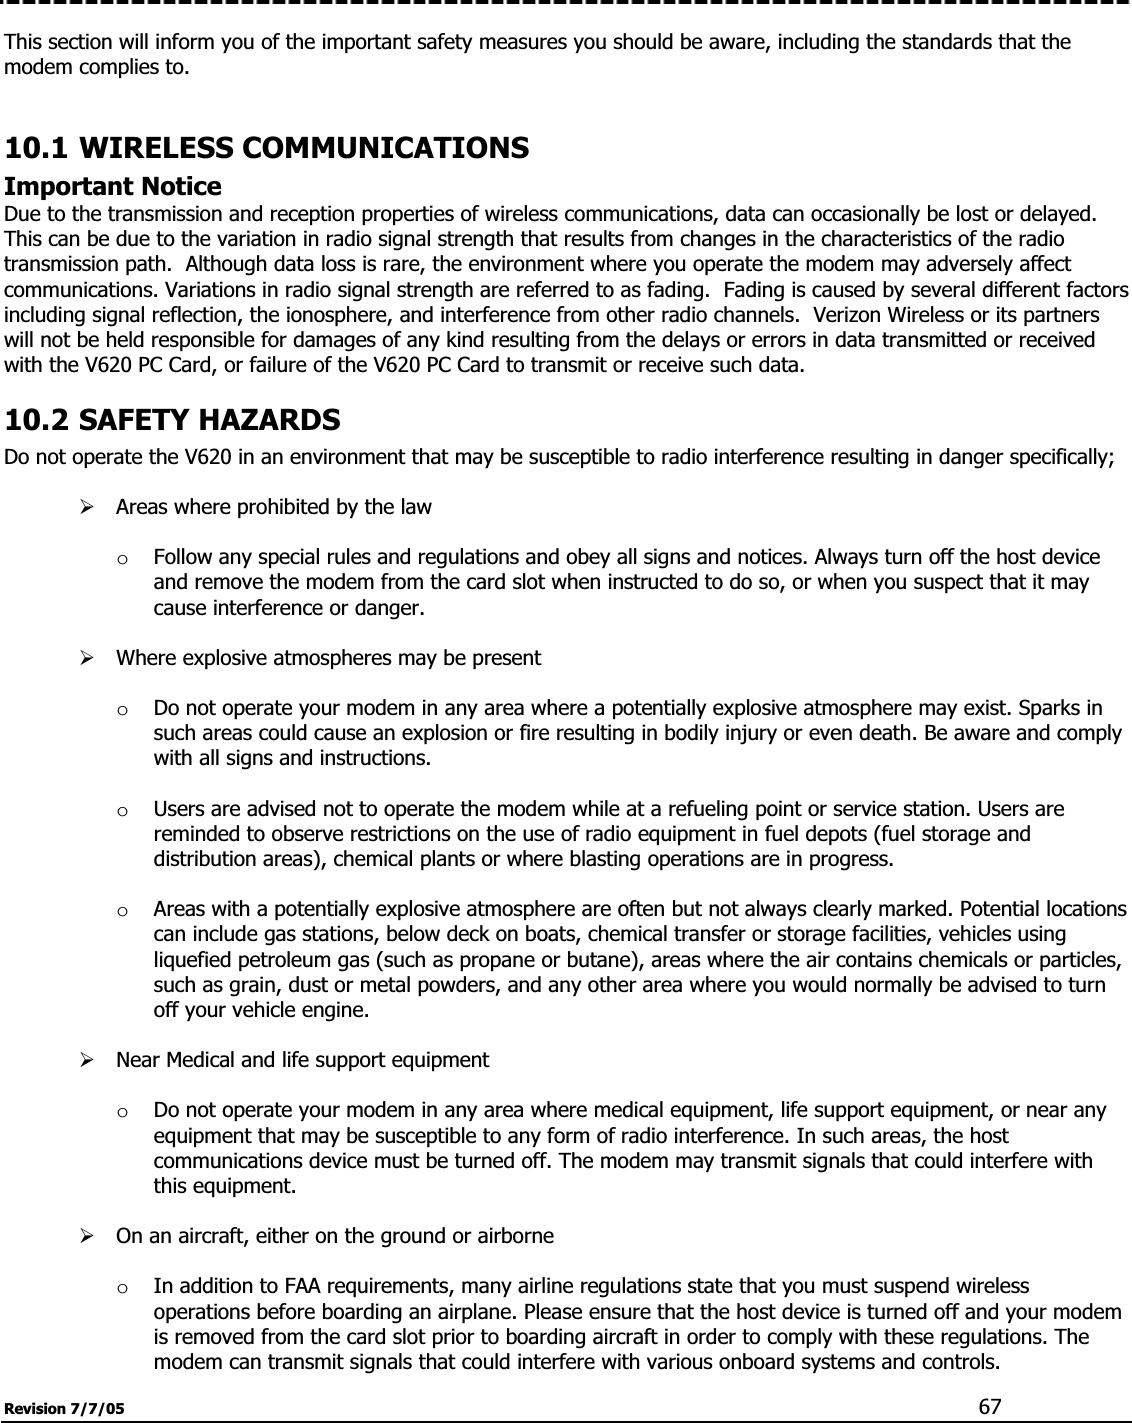 Revision 7/7/05  67This section will inform you of the important safety measures you should be aware, including the standards that the modem complies to. 10.1 WIRELESS COMMUNICATIONS Important Notice Due to the transmission and reception properties of wireless communications, data can occasionally be lost or delayed.  This can be due to the variation in radio signal strength that results from changes in the characteristics of the radio transmission path.  Although data loss is rare, the environment where you operate the modem may adversely affect communications. Variations in radio signal strength are referred to as fading.  Fading is caused by several different factors including signal reflection, the ionosphere, and interference from other radio channels.  Verizon Wireless or its partners will not be held responsible for damages of any kind resulting from the delays or errors in data transmitted or received with the V620 PC Card, or failure of the V620 PC Card to transmit or receive such data. 10.2 SAFETY HAZARDS Do not operate the V620 in an environment that may be susceptible to radio interference resulting in danger specifically; ¾Areas where prohibited by the law oFollow any special rules and regulations and obey all signs and notices. Always turn off the host device and remove the modem from the card slot when instructed to do so, or when you suspect that it may cause interference or danger. ¾Where explosive atmospheres may be present oDo not operate your modem in any area where a potentially explosive atmosphere may exist. Sparks in such areas could cause an explosion or fire resulting in bodily injury or even death. Be aware and comply with all signs and instructions. oUsers are advised not to operate the modem while at a refueling point or service station. Users are reminded to observe restrictions on the use of radio equipment in fuel depots (fuel storage and distribution areas), chemical plants or where blasting operations are in progress. oAreas with a potentially explosive atmosphere are often but not always clearly marked. Potential locations can include gas stations, below deck on boats, chemical transfer or storage facilities, vehicles using liquefied petroleum gas (such as propane or butane), areas where the air contains chemicals or particles, such as grain, dust or metal powders, and any other area where you would normally be advised to turn off your vehicle engine. ¾Near Medical and life support equipment oDo not operate your modem in any area where medical equipment, life support equipment, or near any equipment that may be susceptible to any form of radio interference. In such areas, the host communications device must be turned off. The modem may transmit signals that could interfere with this equipment. ¾On an aircraft, either on the ground or airborne oIn addition to FAA requirements, many airline regulations state that you must suspend wireless operations before boarding an airplane. Please ensure that the host device is turned off and your modem is removed from the card slot prior to boarding aircraft in order to comply with these regulations. The modem can transmit signals that could interfere with various onboard systems and controls. 